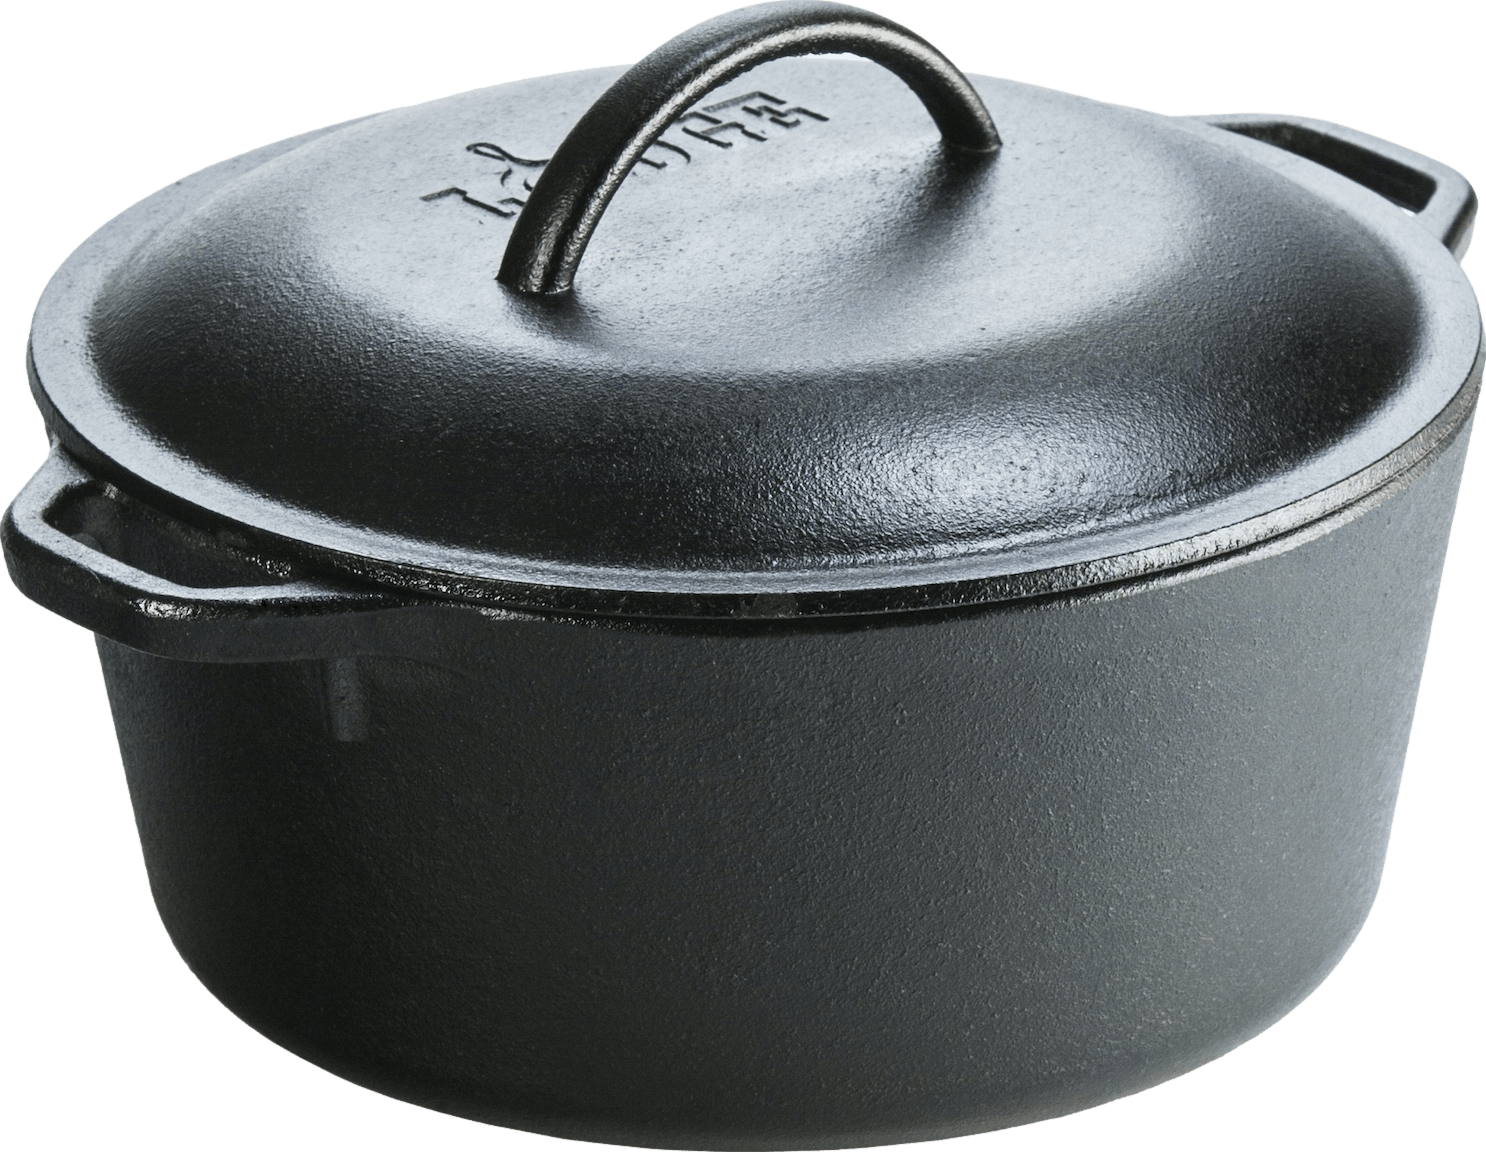 This Popular Lodge Cast Iron Dutch Oven Is 38% Off at